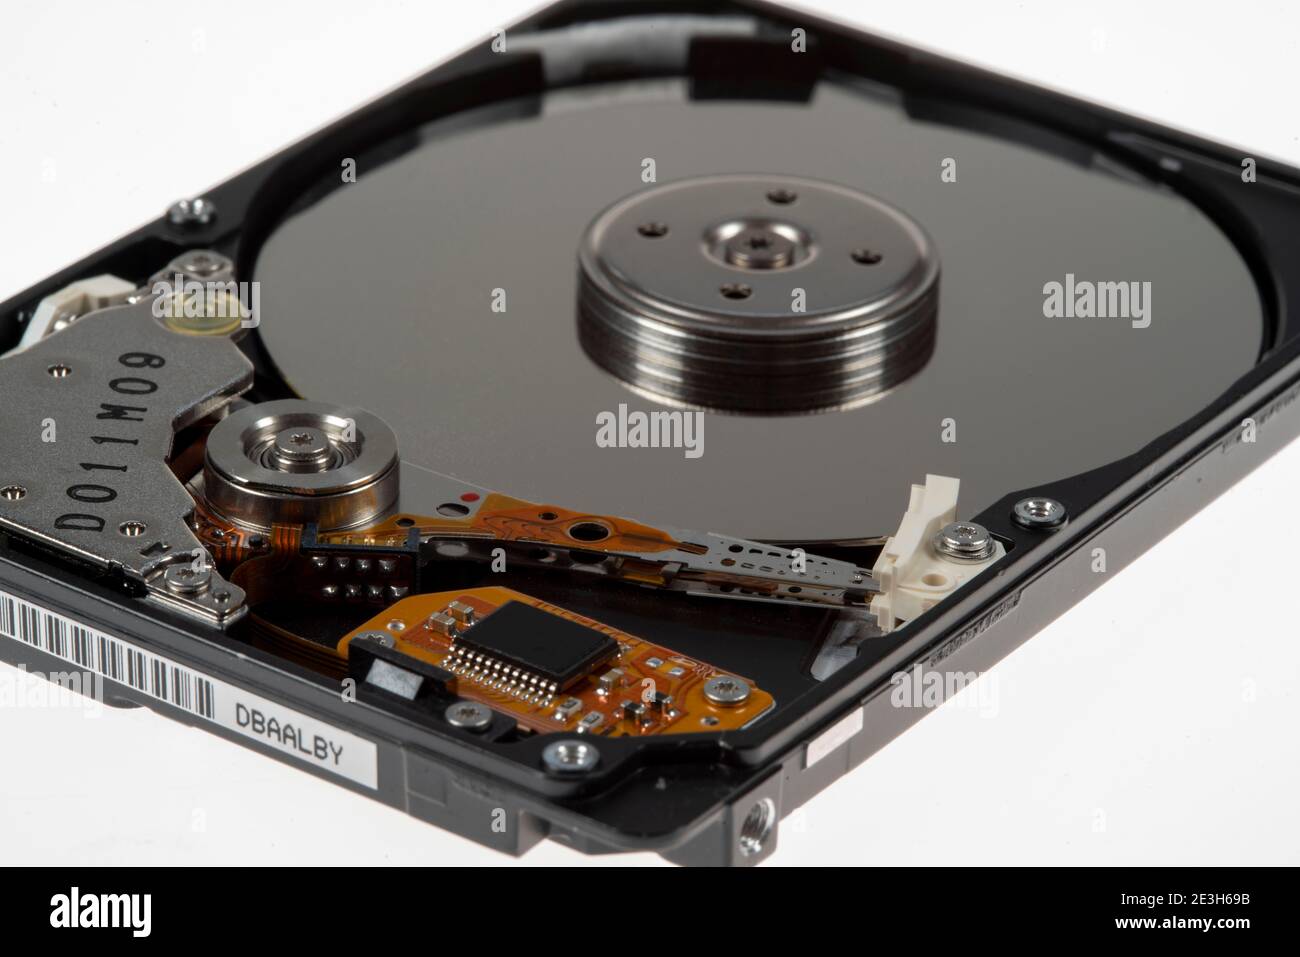 Computer hard disk, opened, read-write head on the storage disk.  Symbol image, Stock Photo